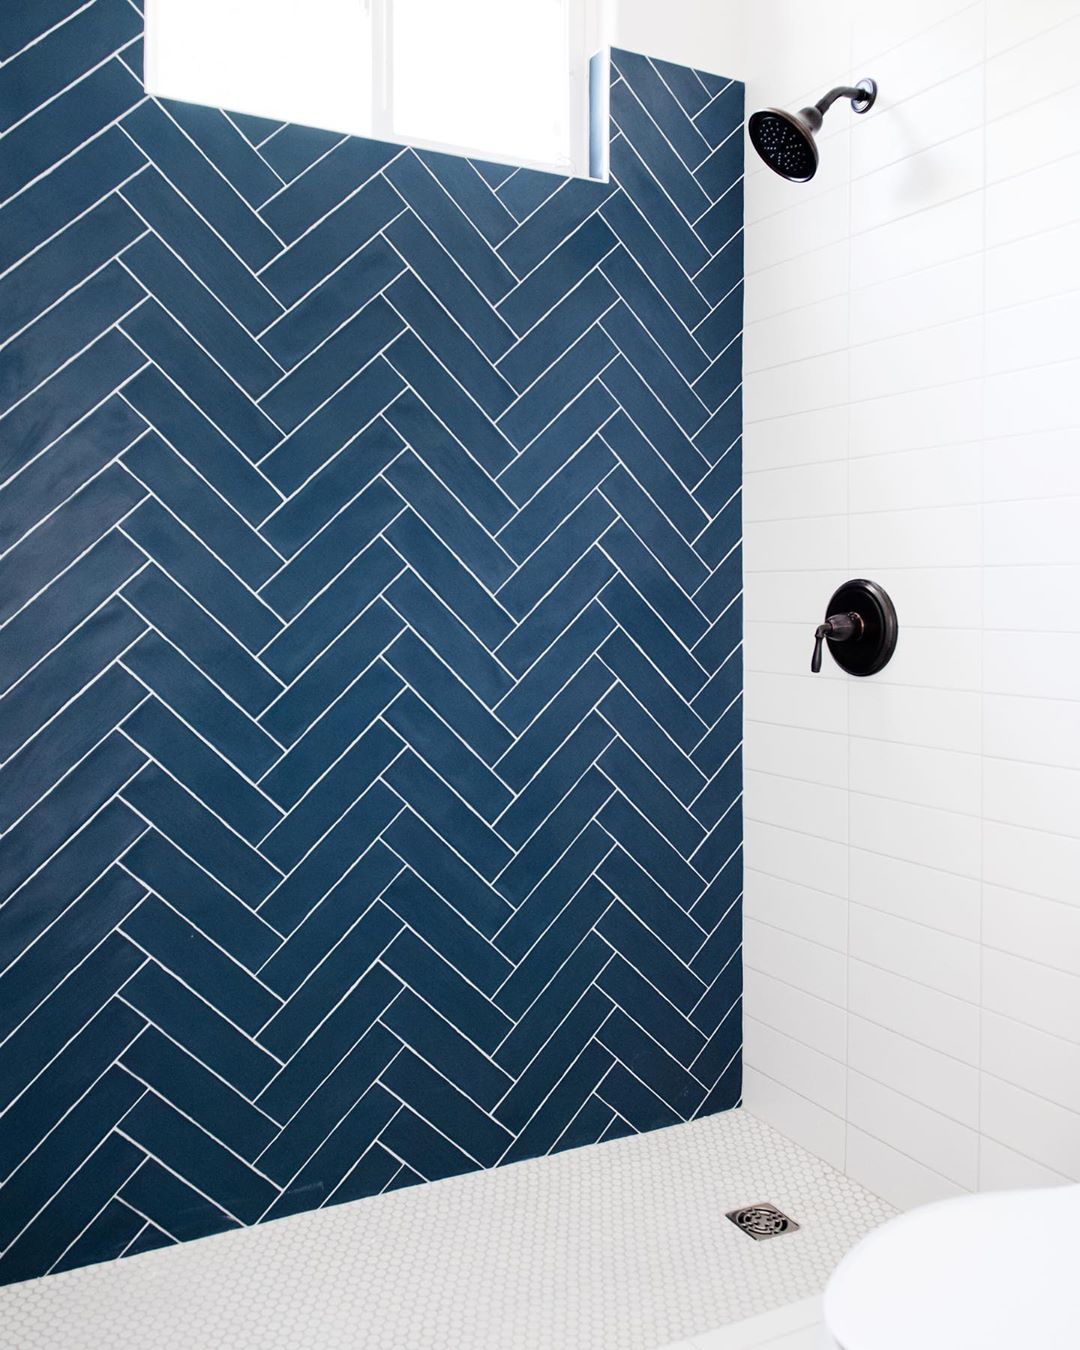 How to Choose Grout Type & Color | TileBar.com